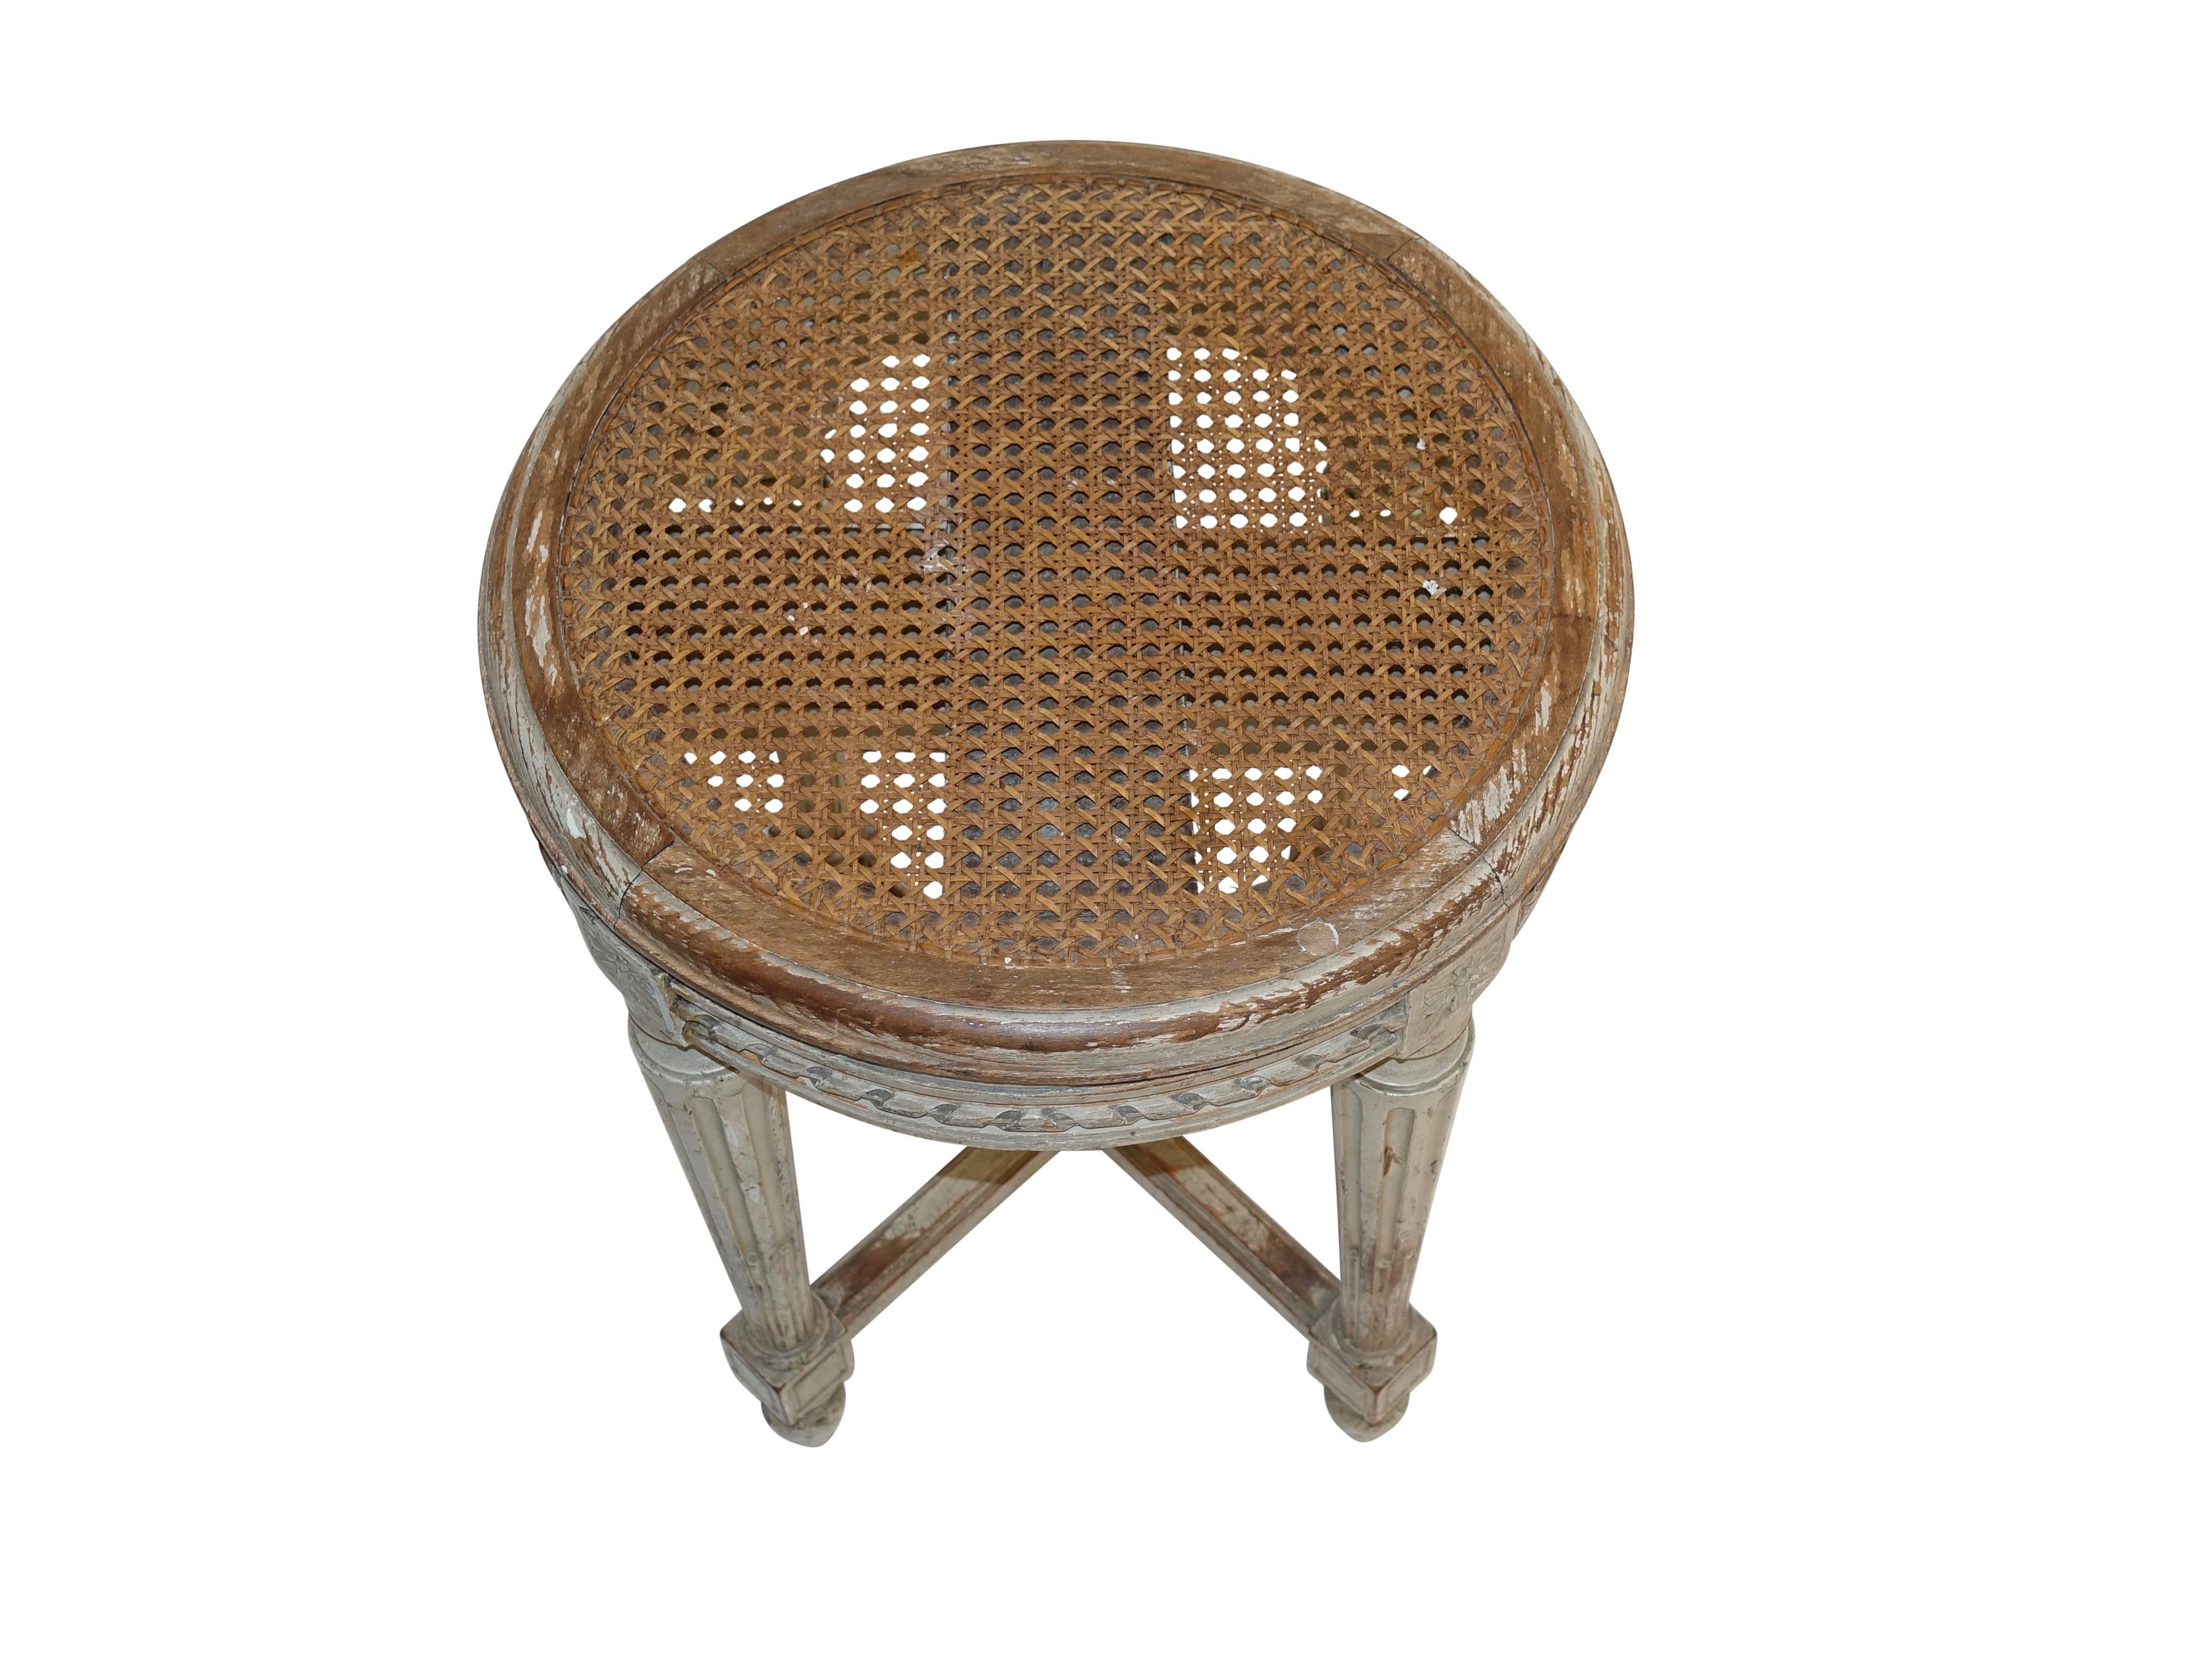 Painted Louis XVI Piano Stool with Caned Seat, French, circa 1880